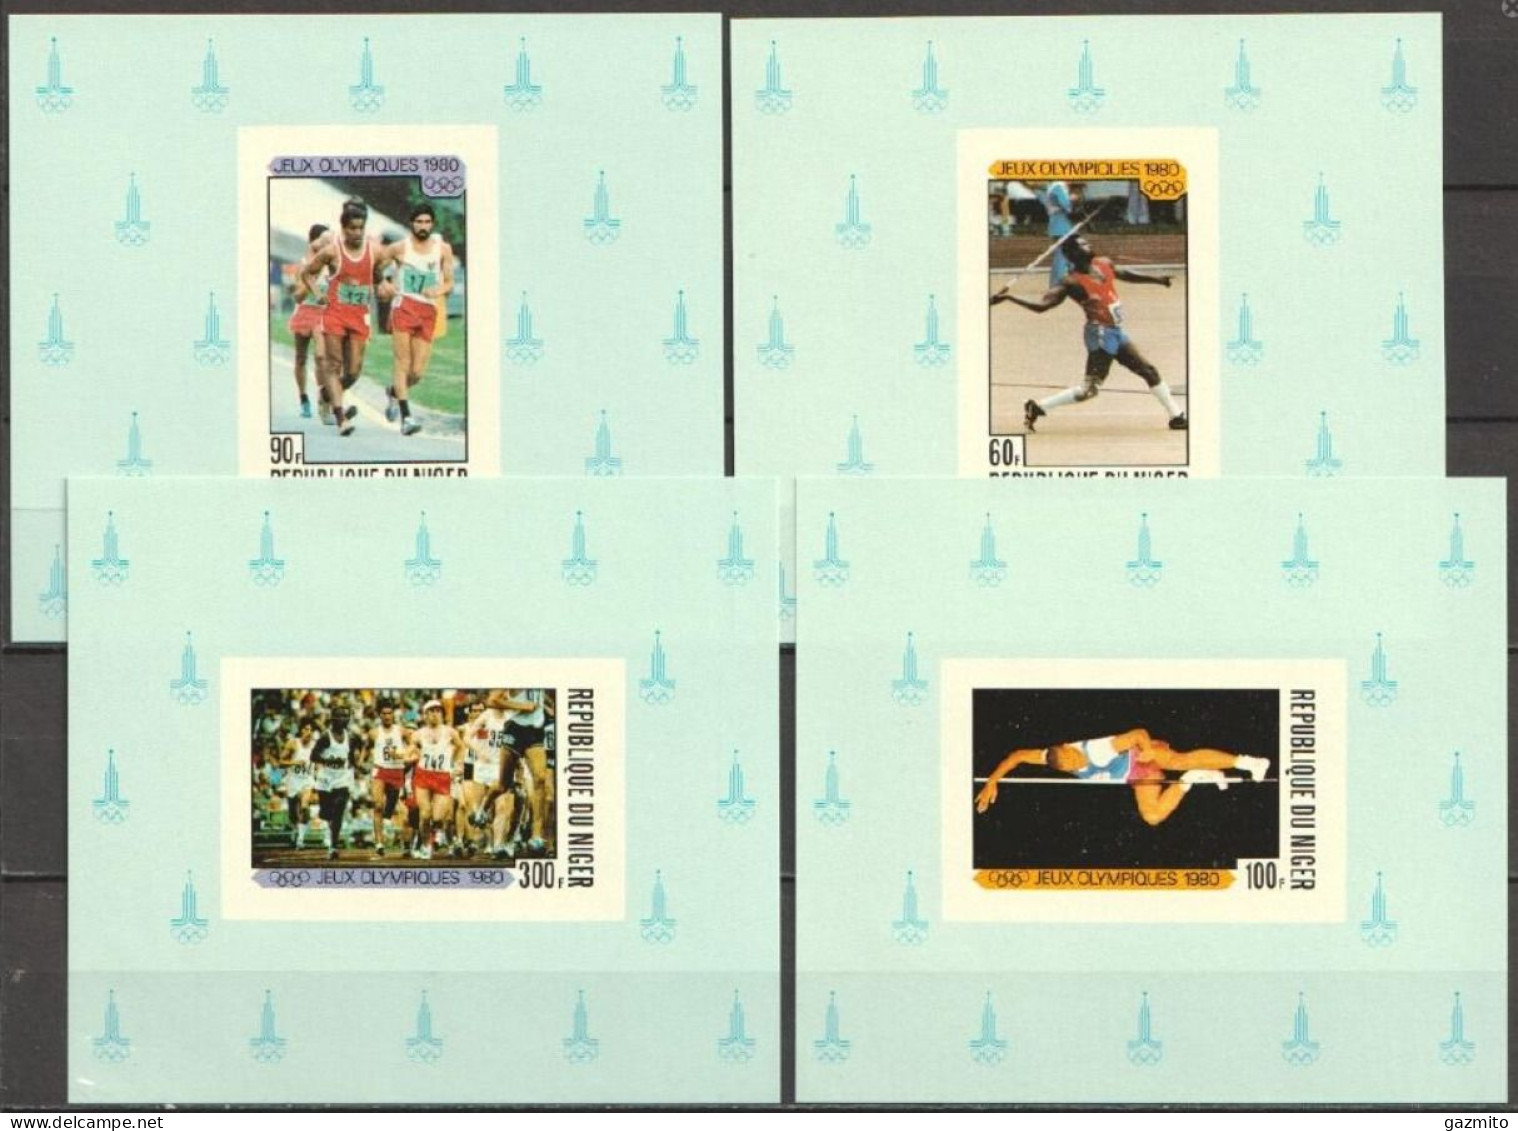 Niger 1980, Olympic Games In Moscow, 4 Proofs - Niger (1960-...)